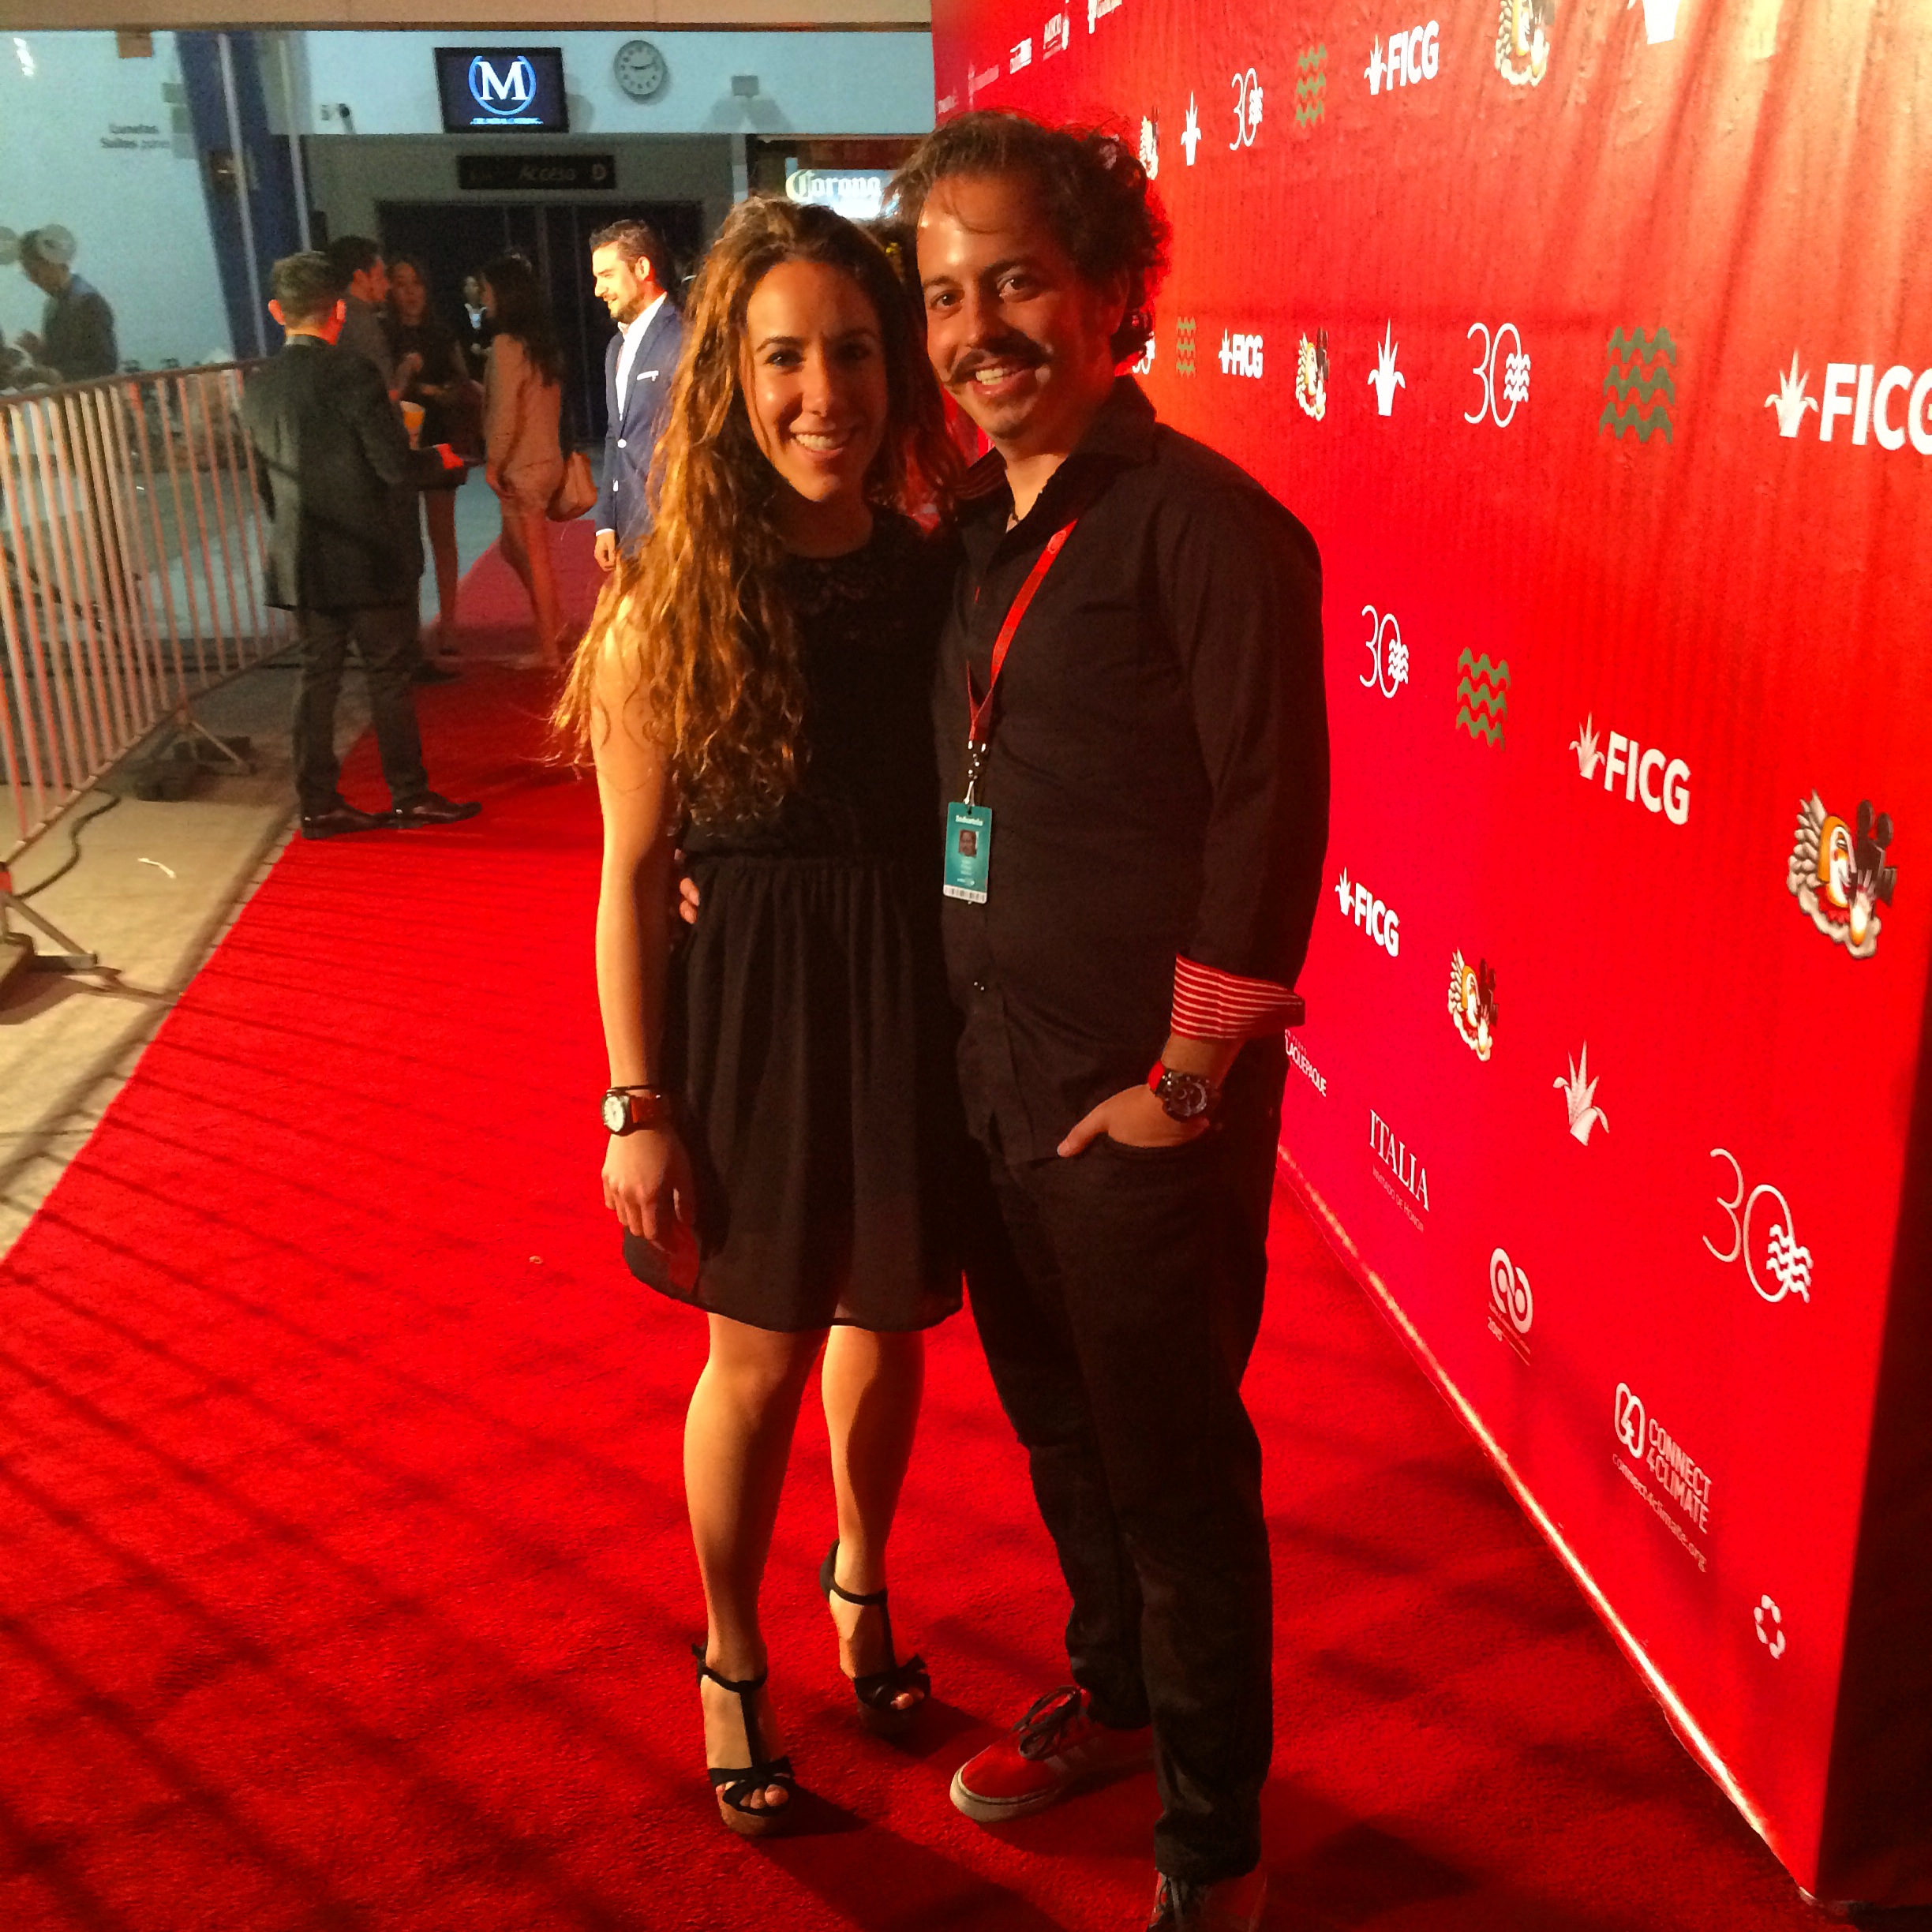 Isaac Ezban with producer and wife Miriam Mercado at the red carpet of the Guadalajara International Film Festival, ready to present THE INCIDENT, March 2015